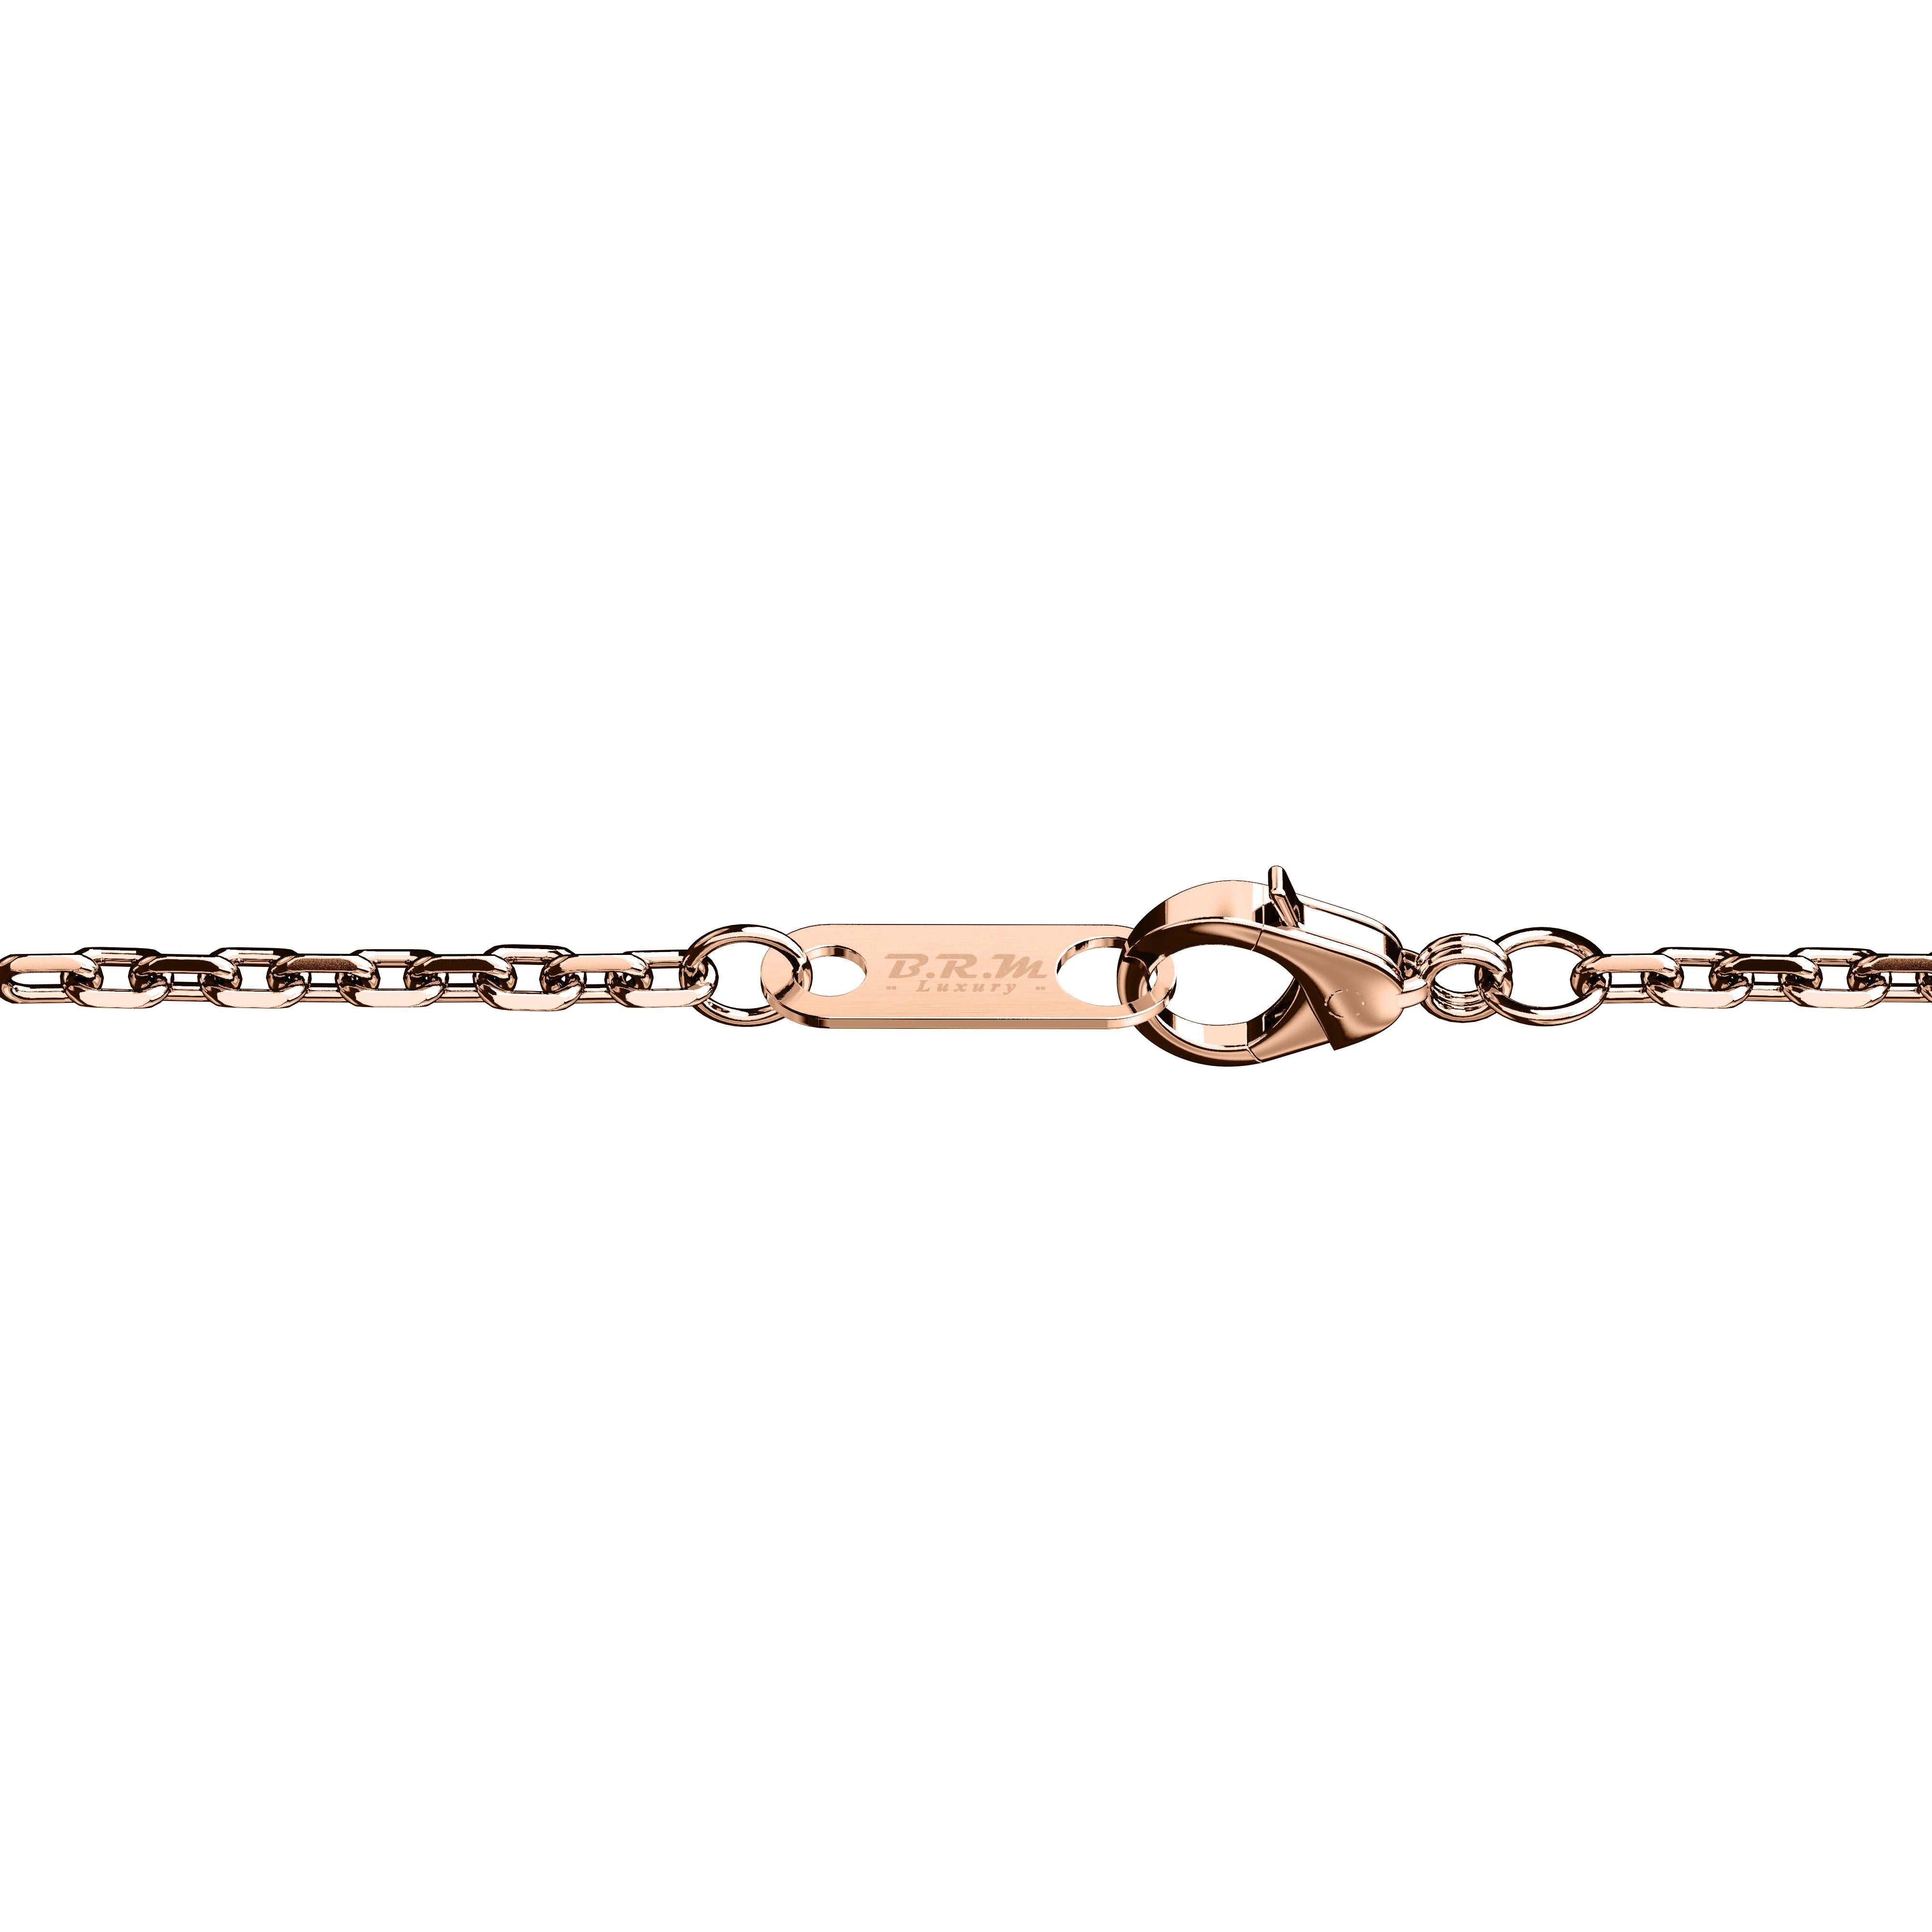 B.R.M Dolce Vita Twice (2 in 1) bracelet 18 Carats rose and gray gold Spotting circle is an exquisite work of art. 

The unique spiraling succession of circles motif is inspired by the decoration techniques in watchmaking that will surely captivates